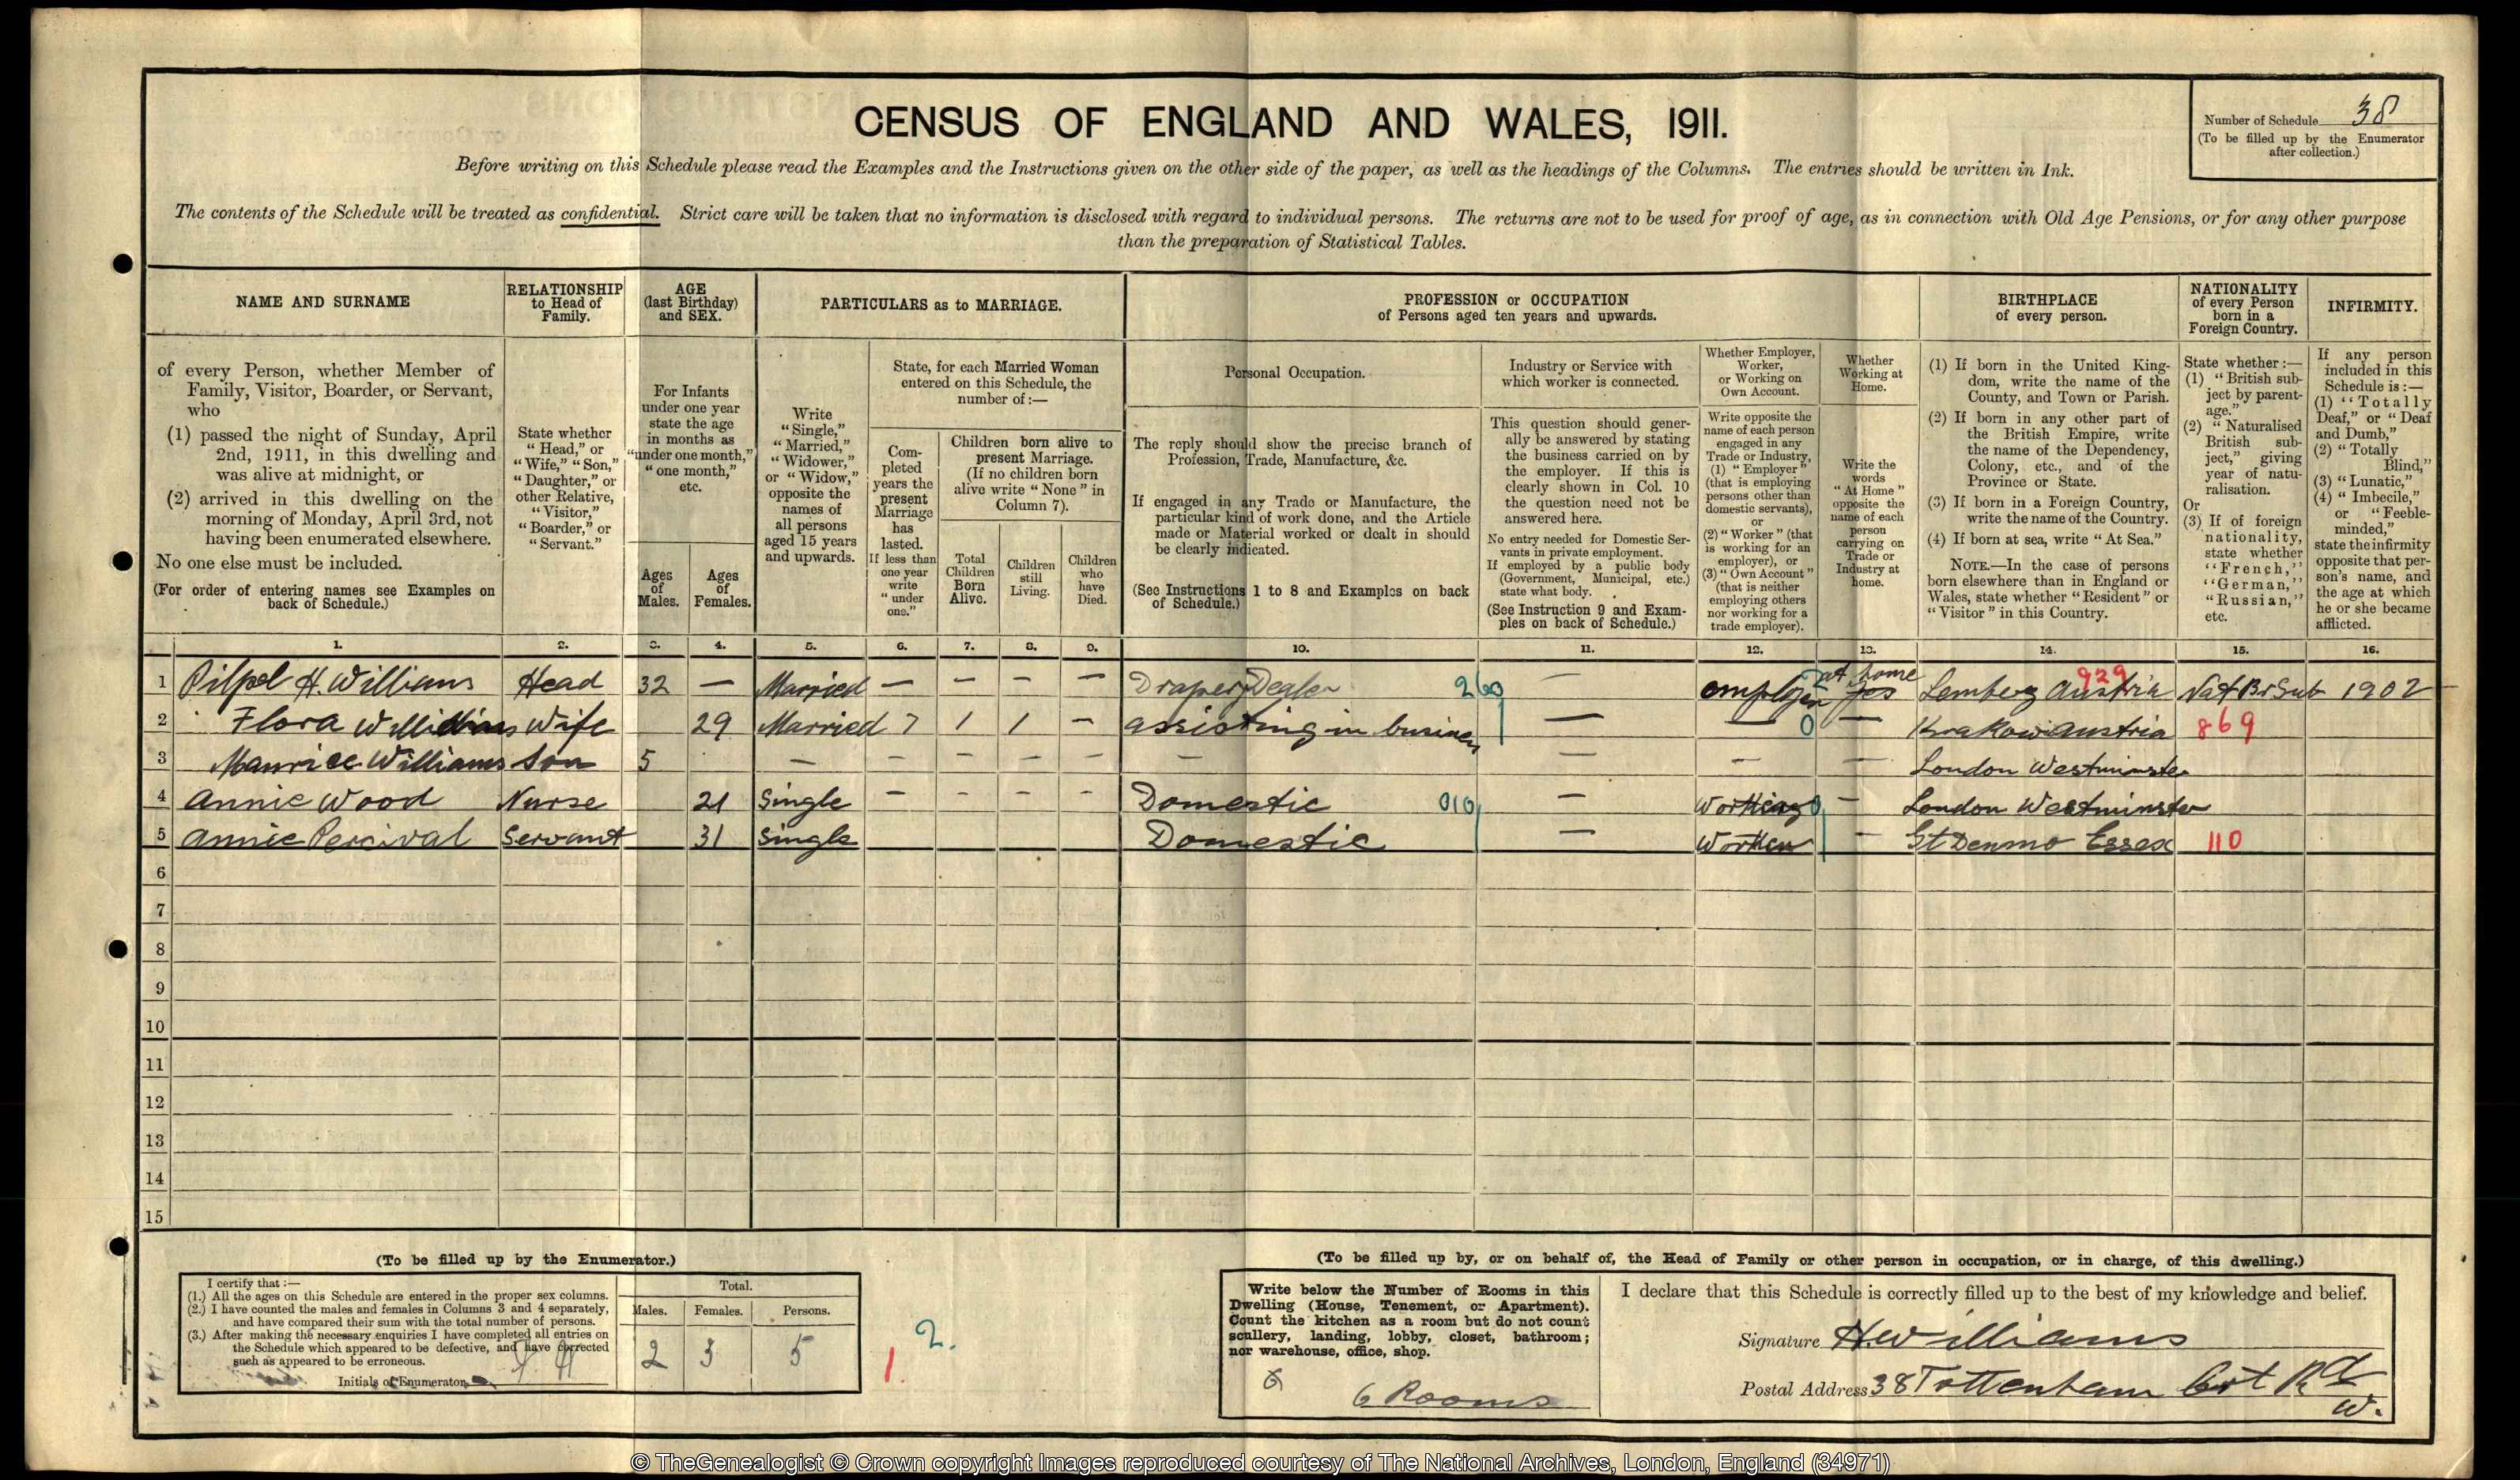 Another piece of the name puzzle, in the 1911 Census